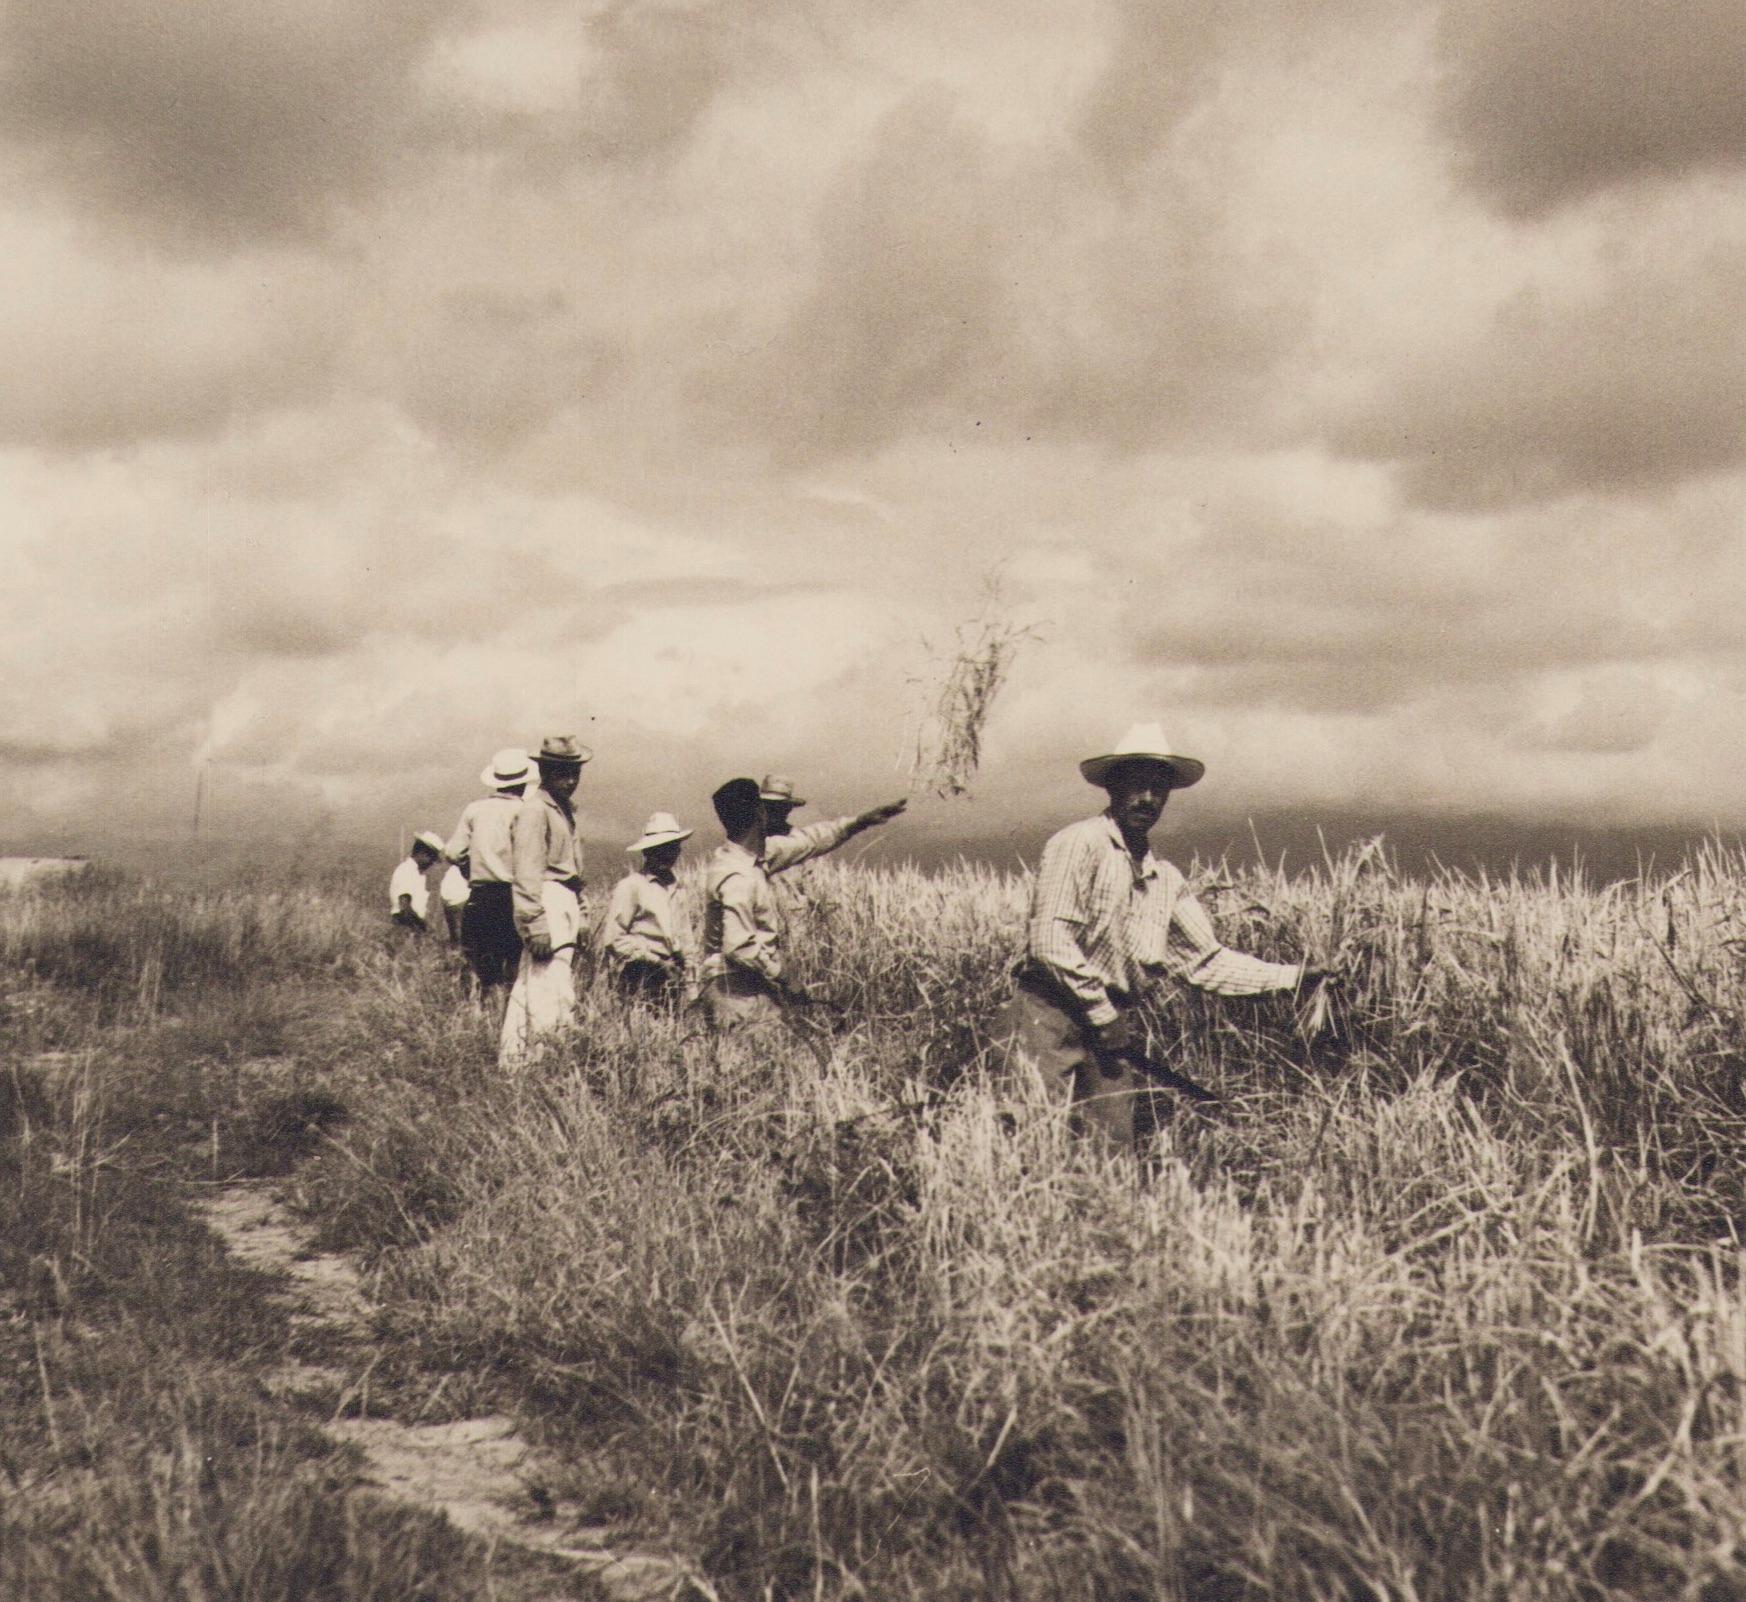 Colombia, Rice, Harvest, Black and White Photography, 1960s, 24, 4 x 24, 2 cm - Brown Portrait Photograph by Hanna Seidel